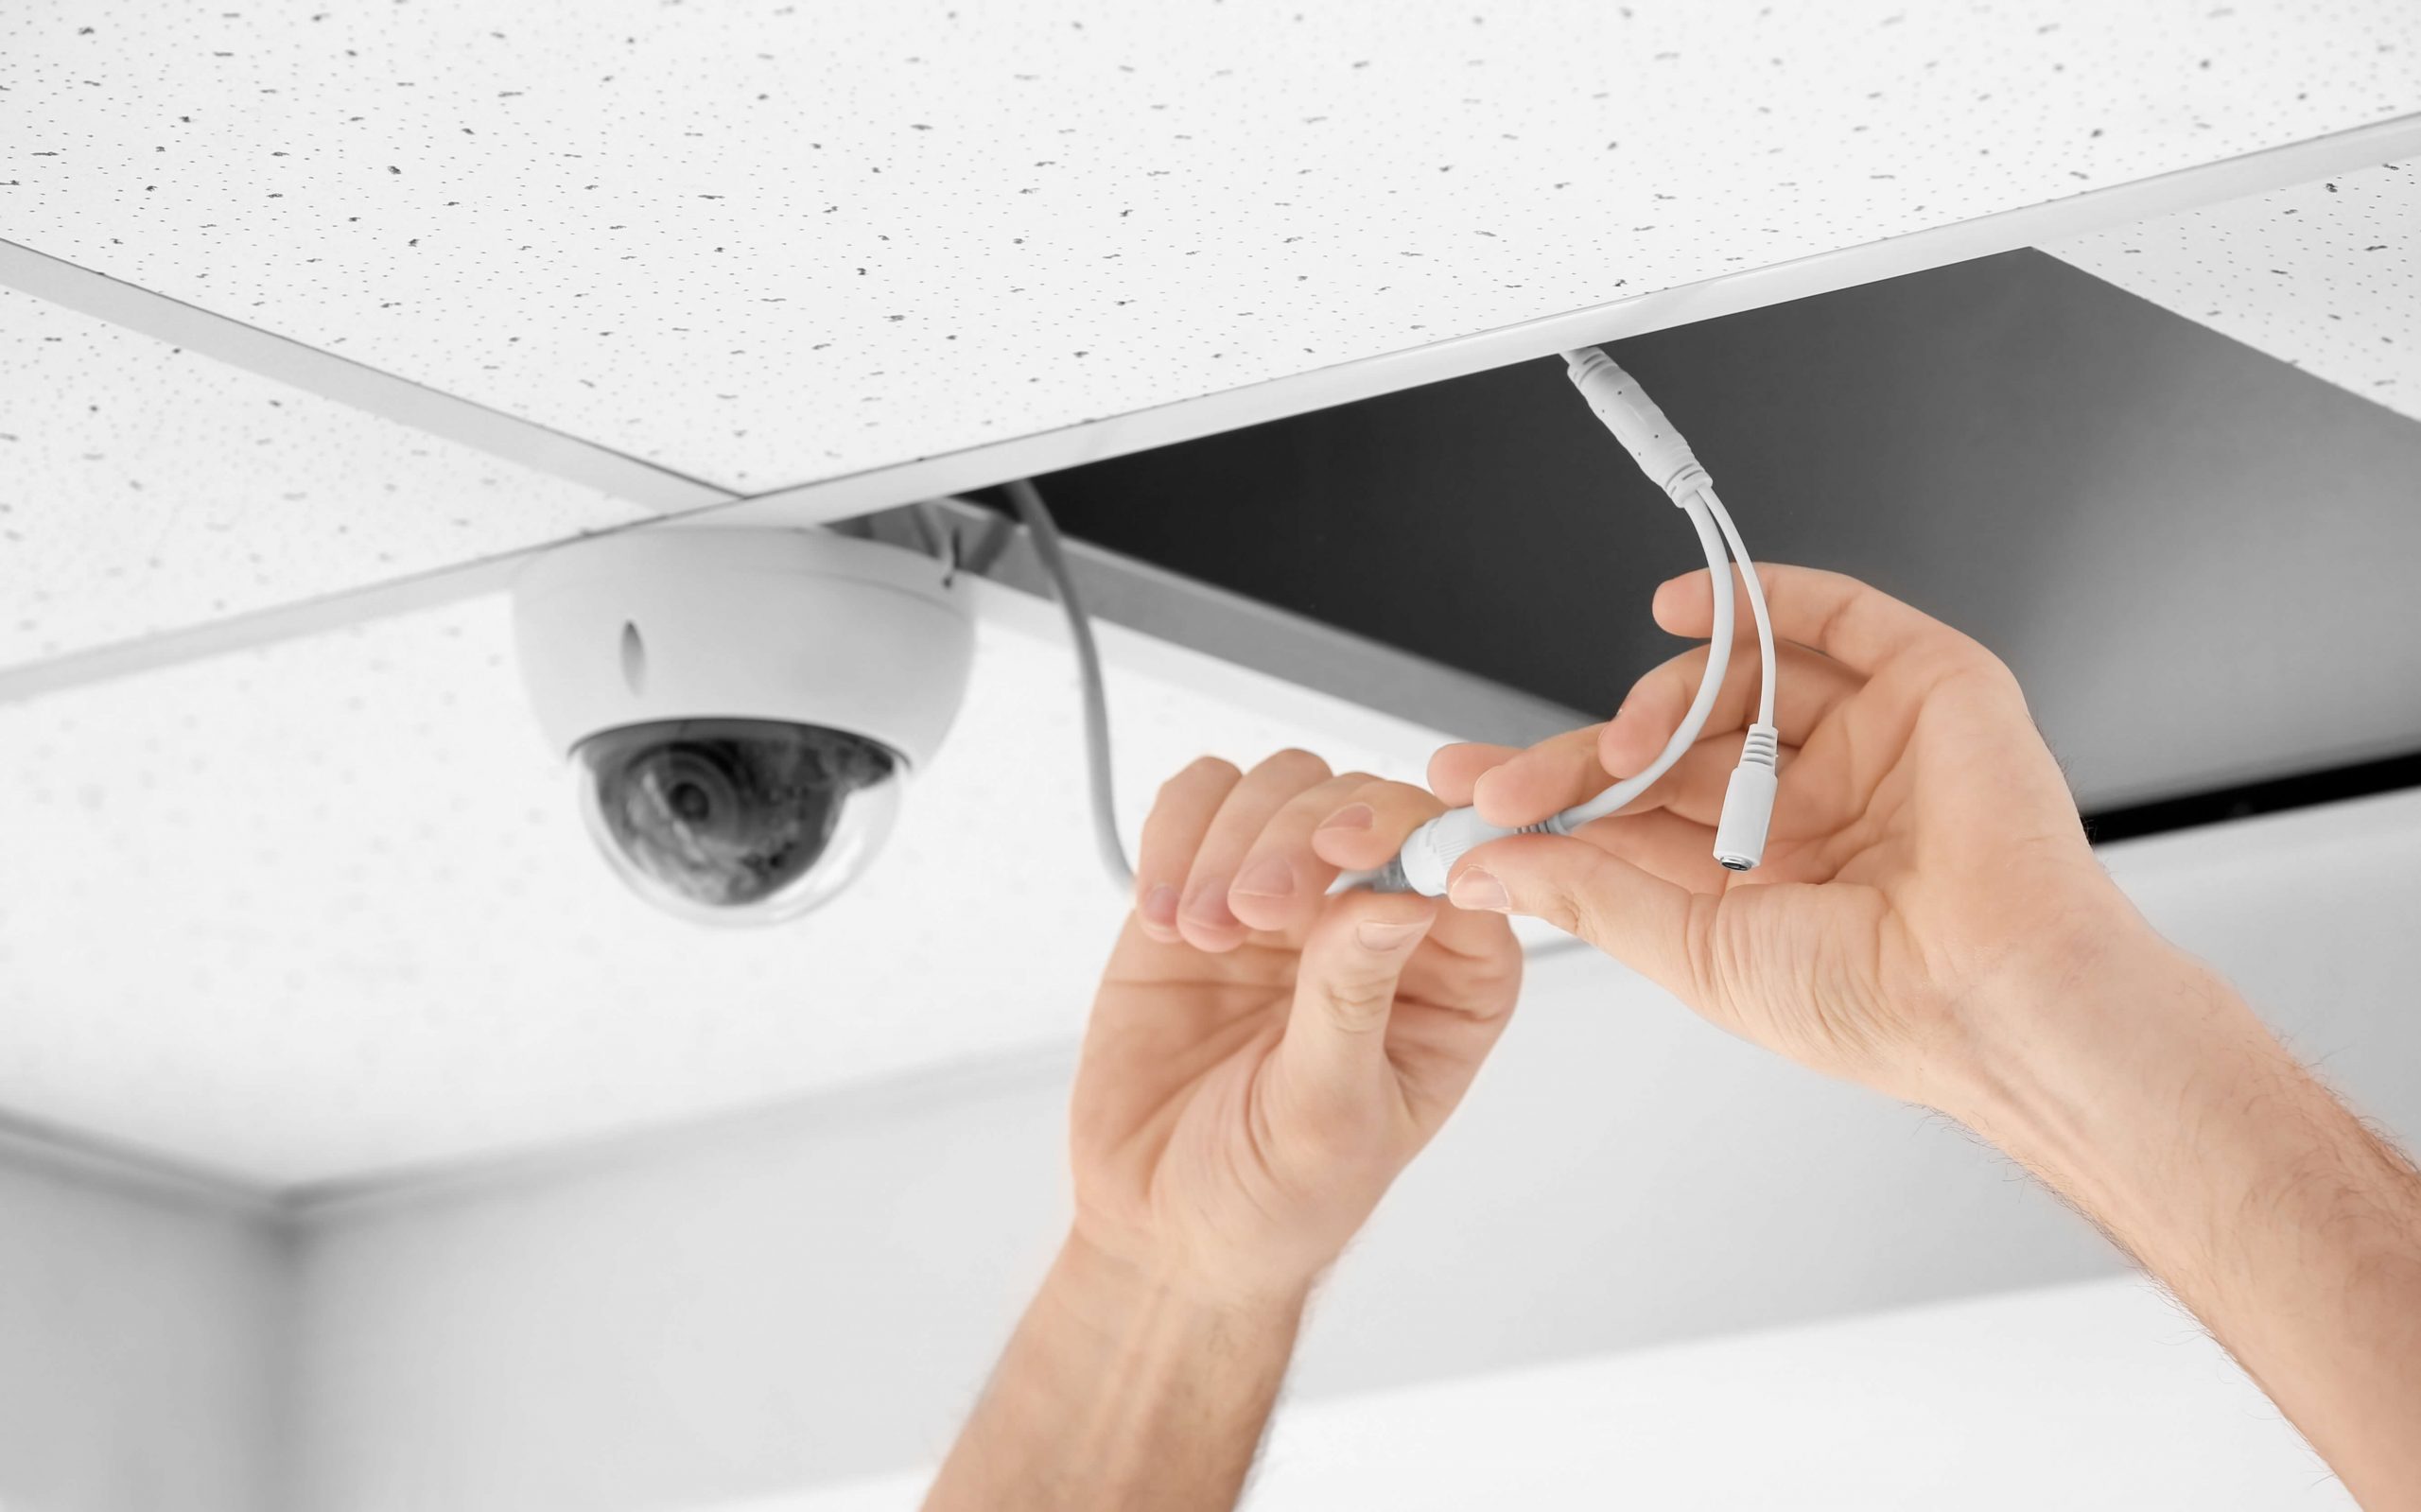 How To Connect Cat5 Cable To CCTV Security Camera